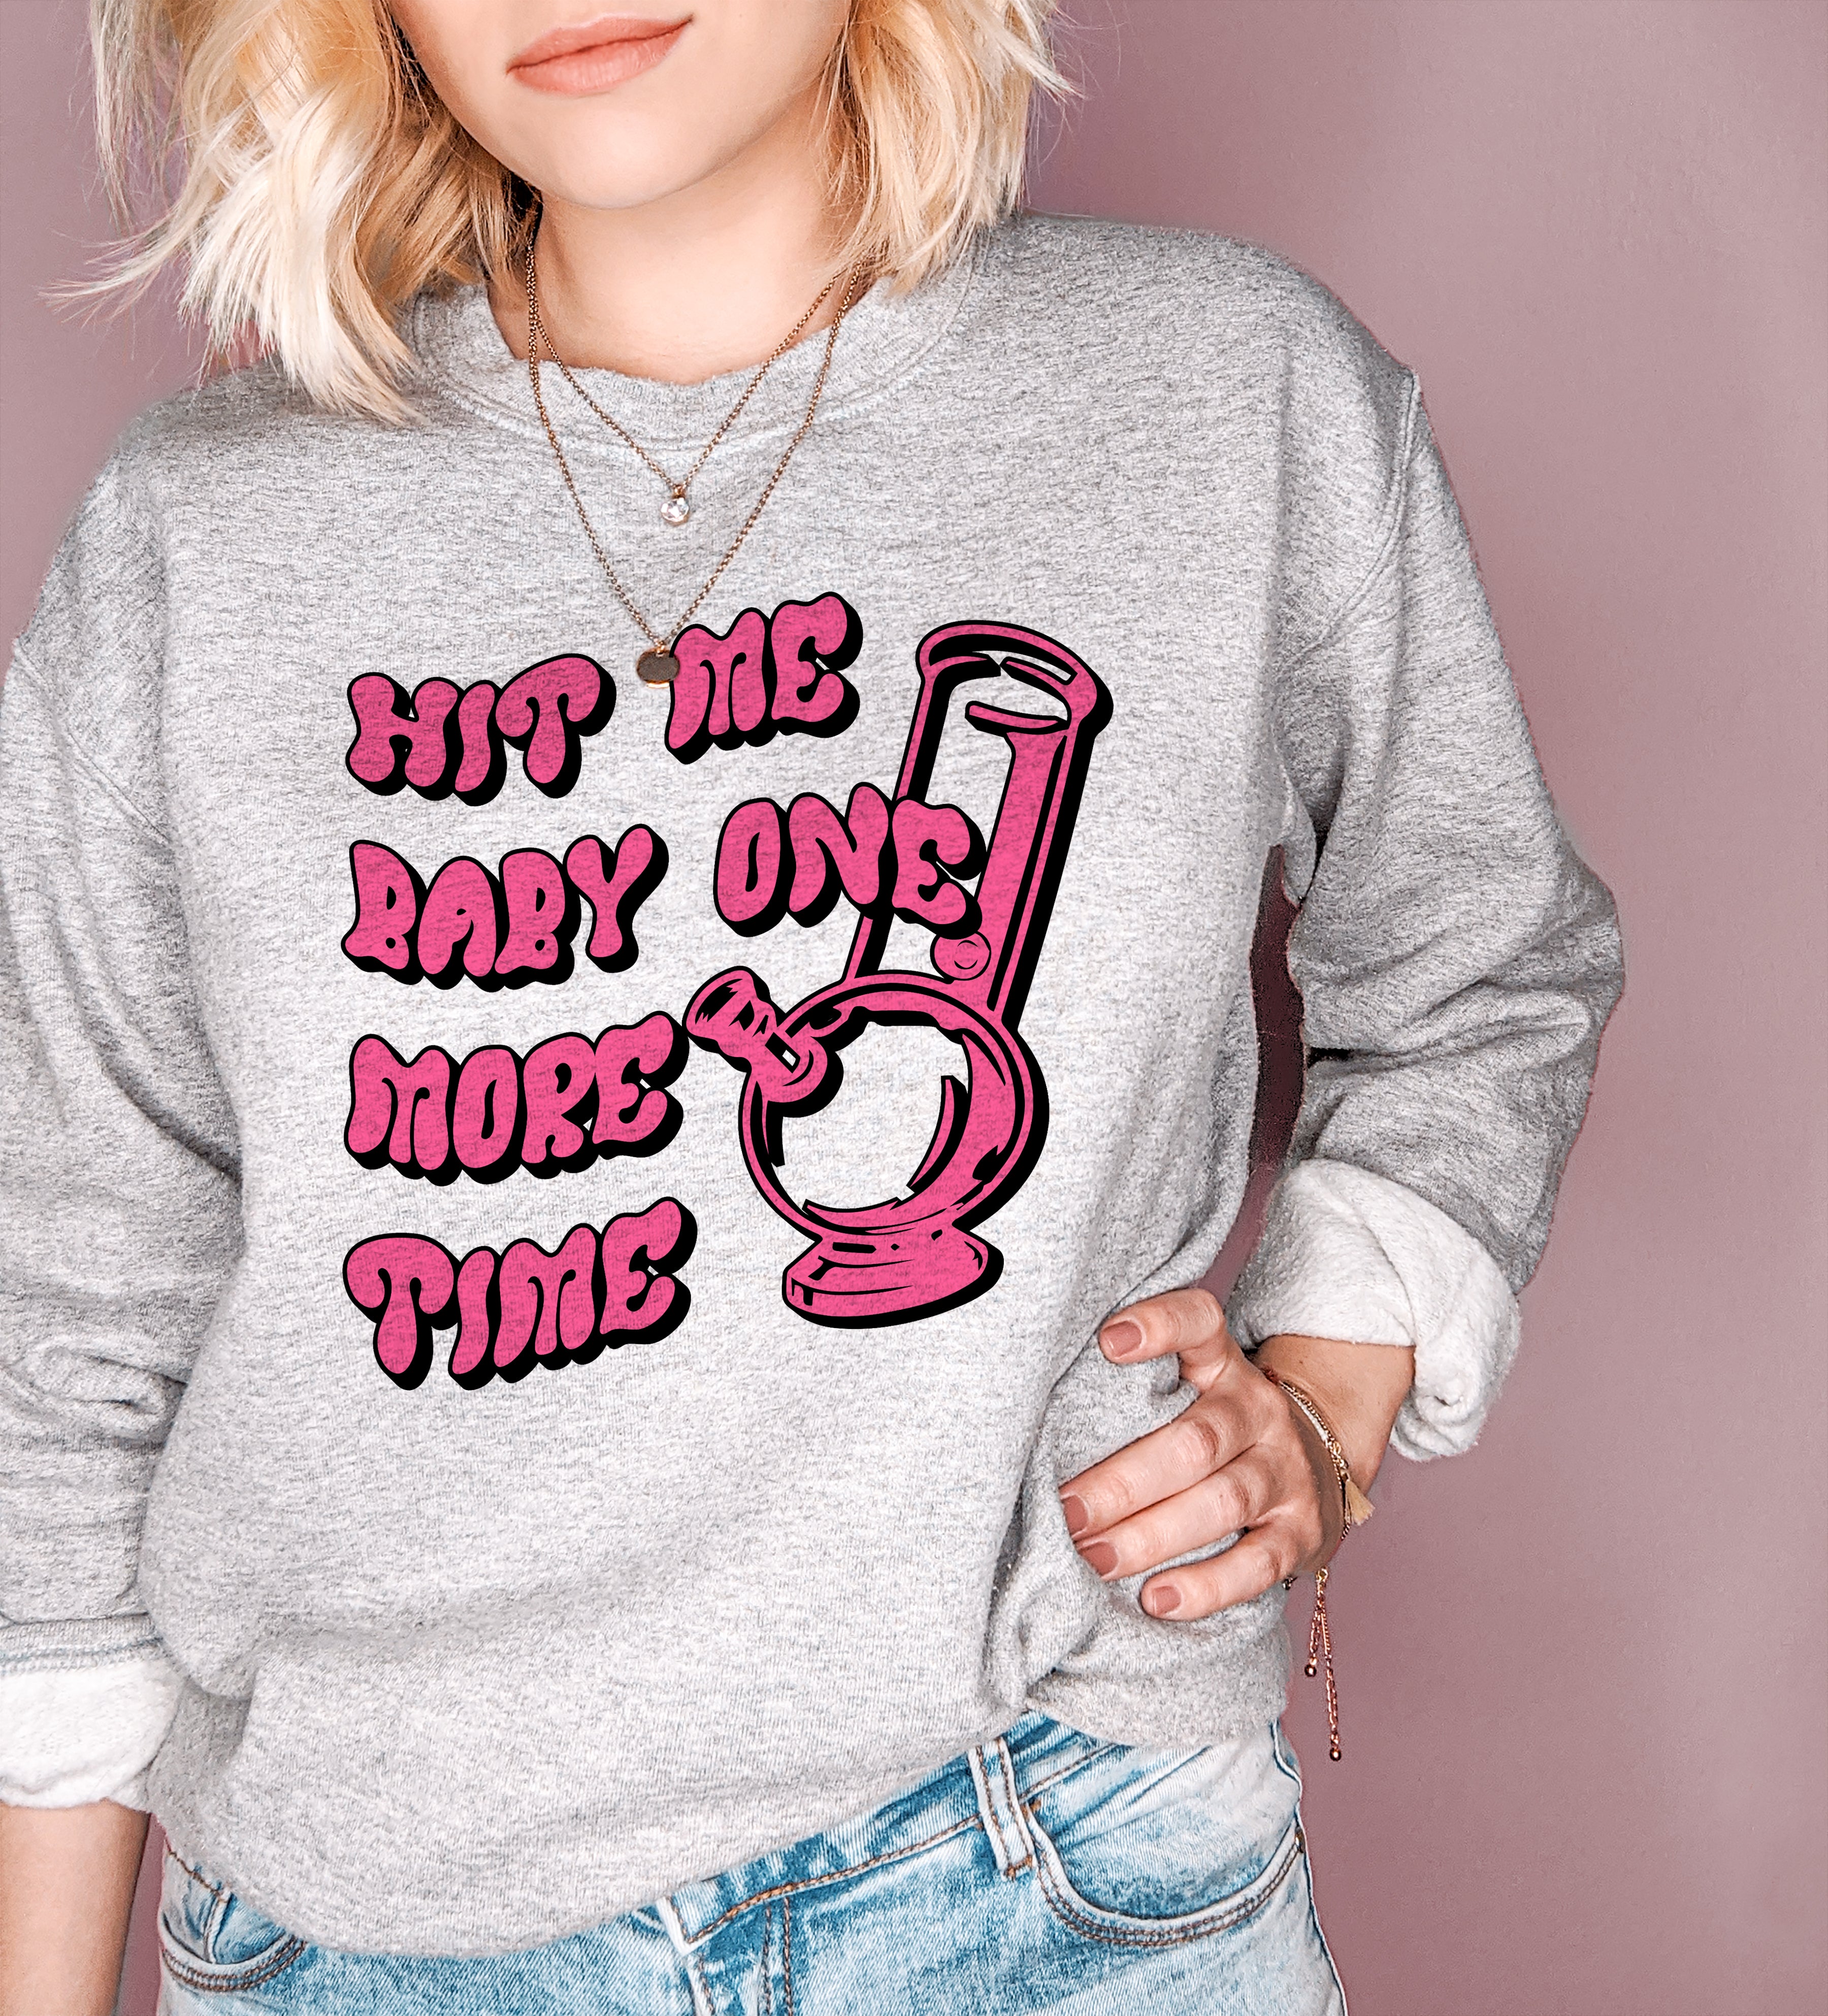 Hit Me Baby One More Time Sweatshirt - Stoner Britney Spears Sweater - Weed Sweater - HighCiti